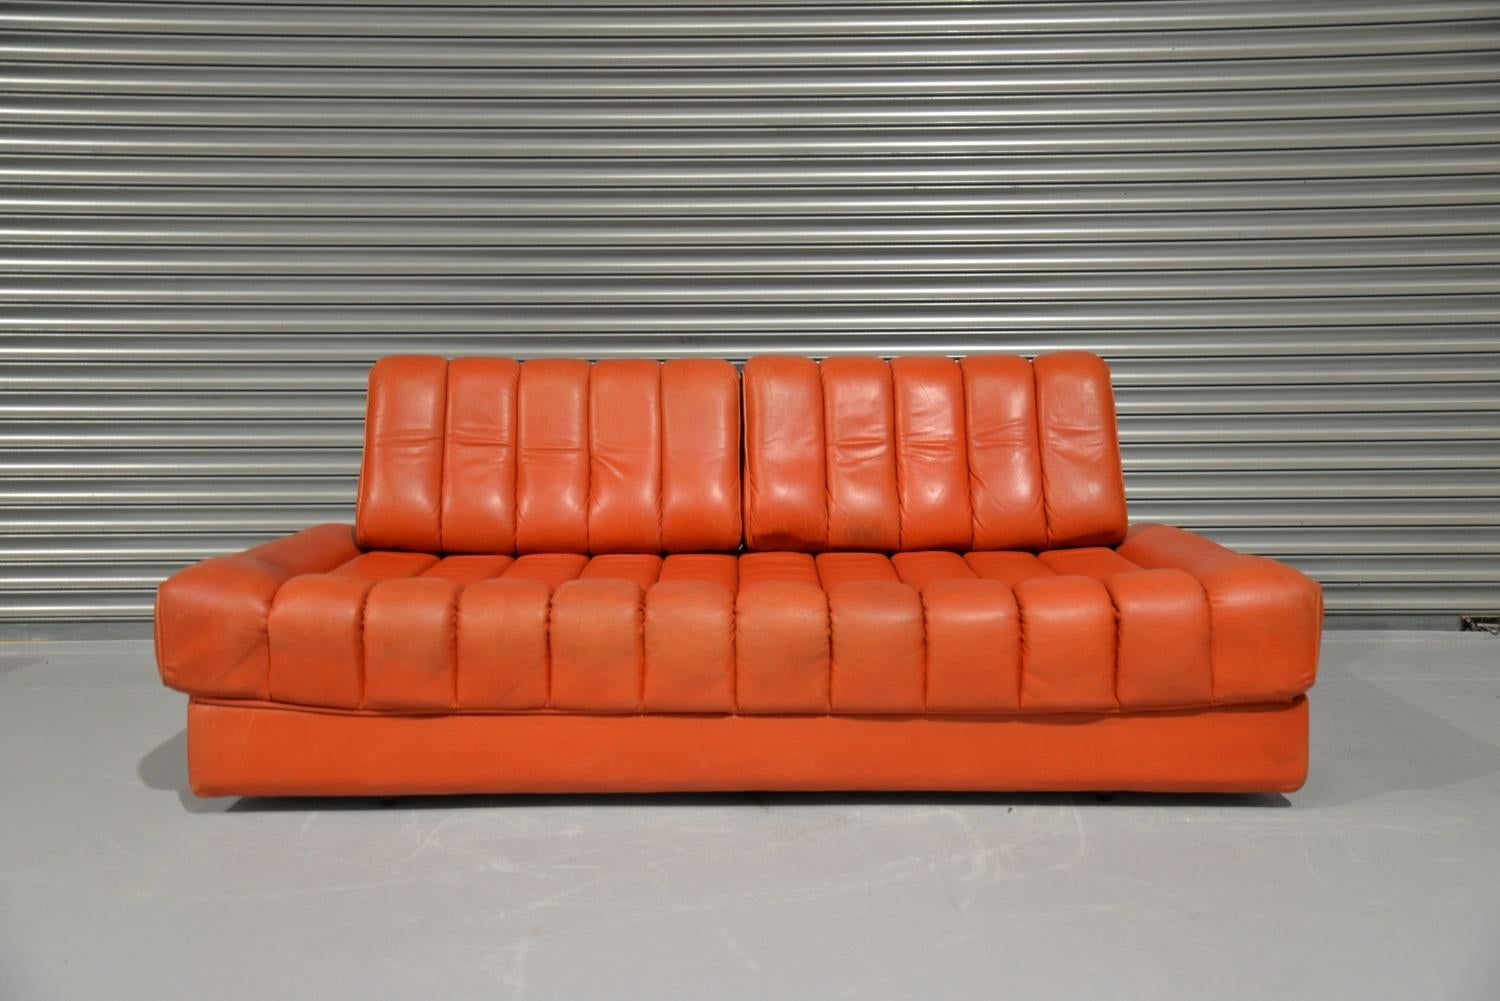 We are delighted to bring to you a highly desirable retro De Sede daybed and sofa. Rarely available and hand built in the 1970`s by De Sede craftsman in Switzerland, this versatile retro daybed doubles up as a sofa and loveseat. This extremely